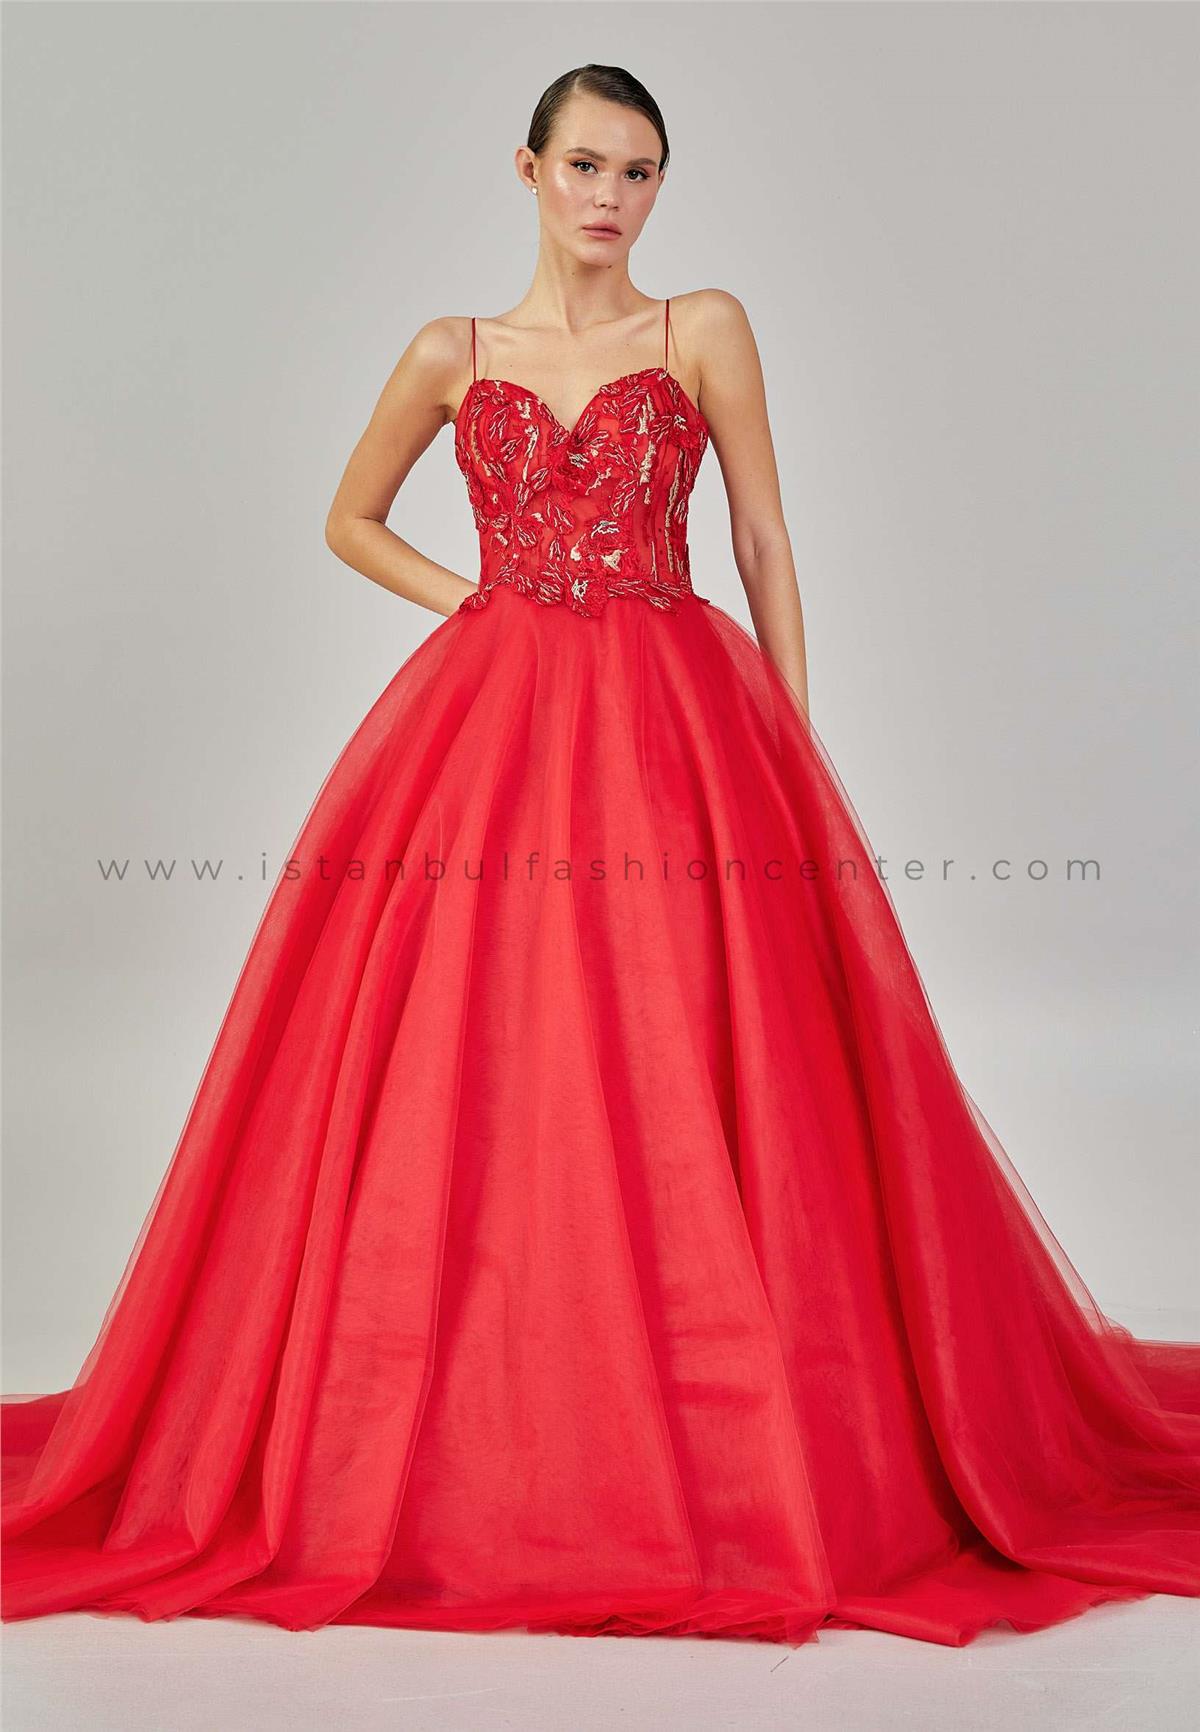 Ball Gowns – Style Icon www.dressrent.in